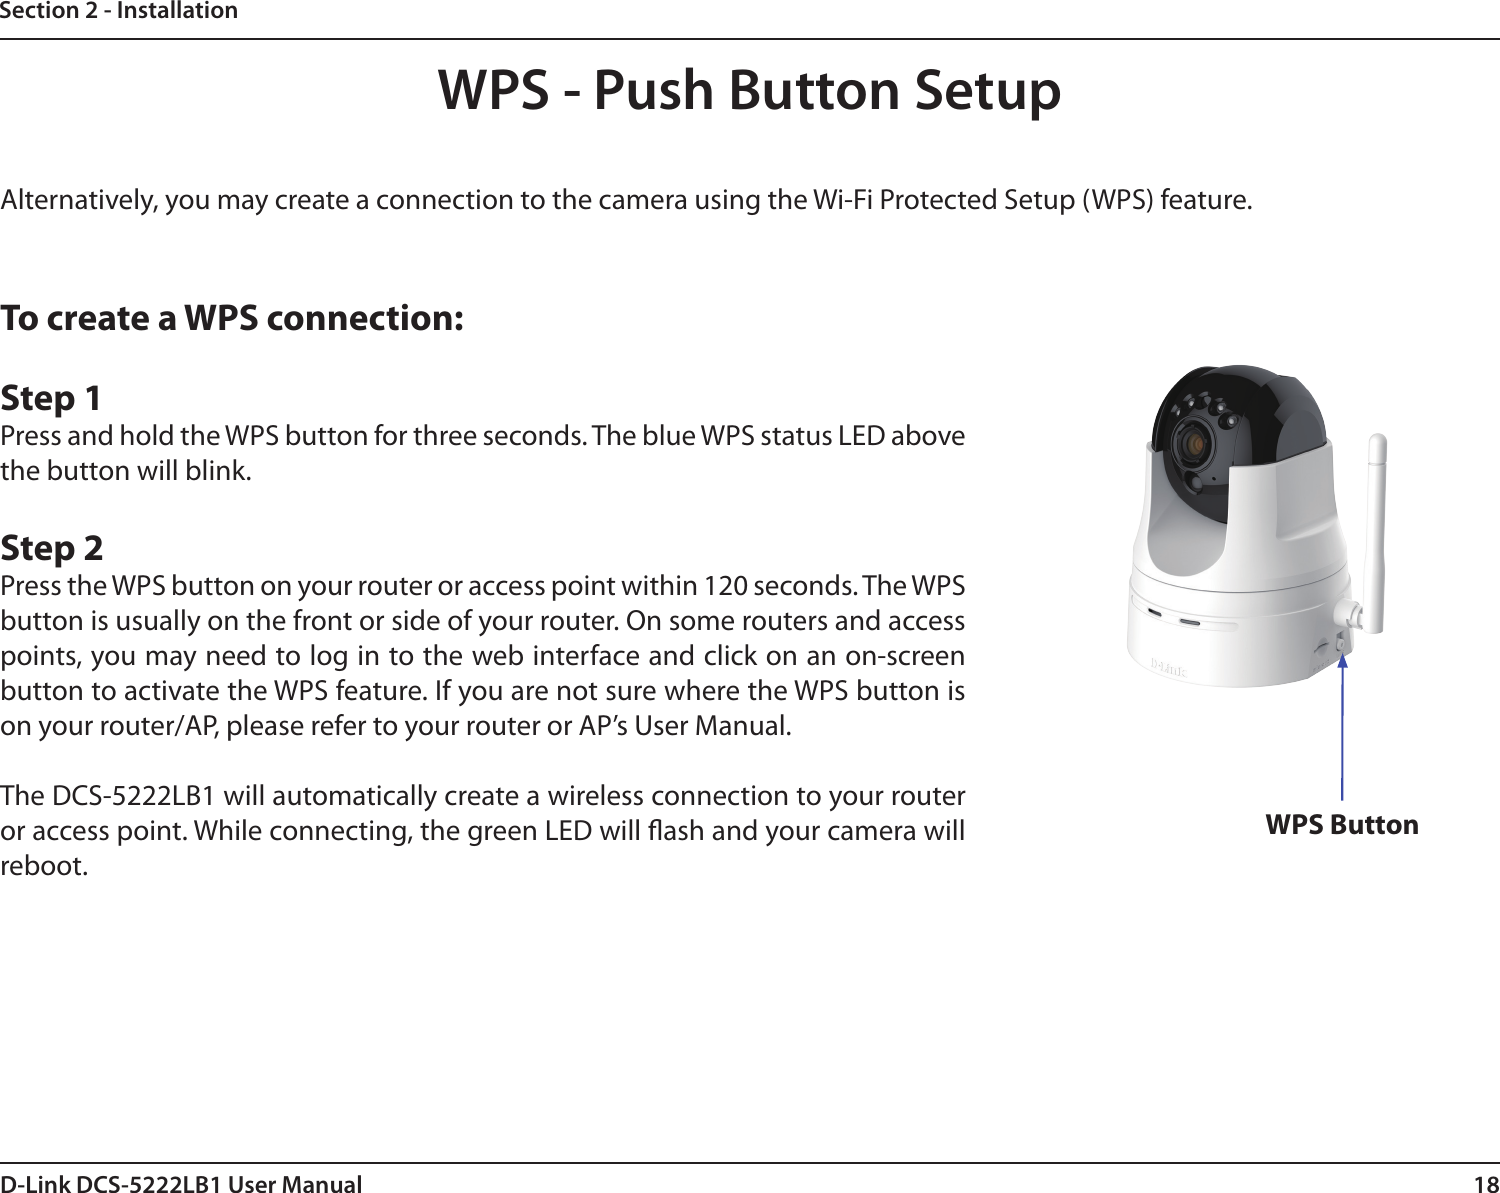 18D-Link DCS-5222LB1 User ManualSection 2 - InstallationTo create a WPS connection:Step 1Press and hold the WPS button for three seconds. The blue WPS status LED above the button will blink.Step 2Press the WPS button on your router or access point within 120 seconds. The WPS button is usually on the front or side of your router. On some routers and access points, you may need to log in to the web interface and click on an on-screen button to activate the WPS feature. If you are not sure where the WPS button is on your router/AP, please refer to your router or AP’s User Manual.The DCS-5222LB1 will automatically create a wireless connection to your router or access point. While connecting, the green LED will ash and your camera will reboot.WPS - Push Button SetupAlternatively, you may create a connection to the camera using the Wi-Fi Protected Setup (WPS) feature.WPS Button